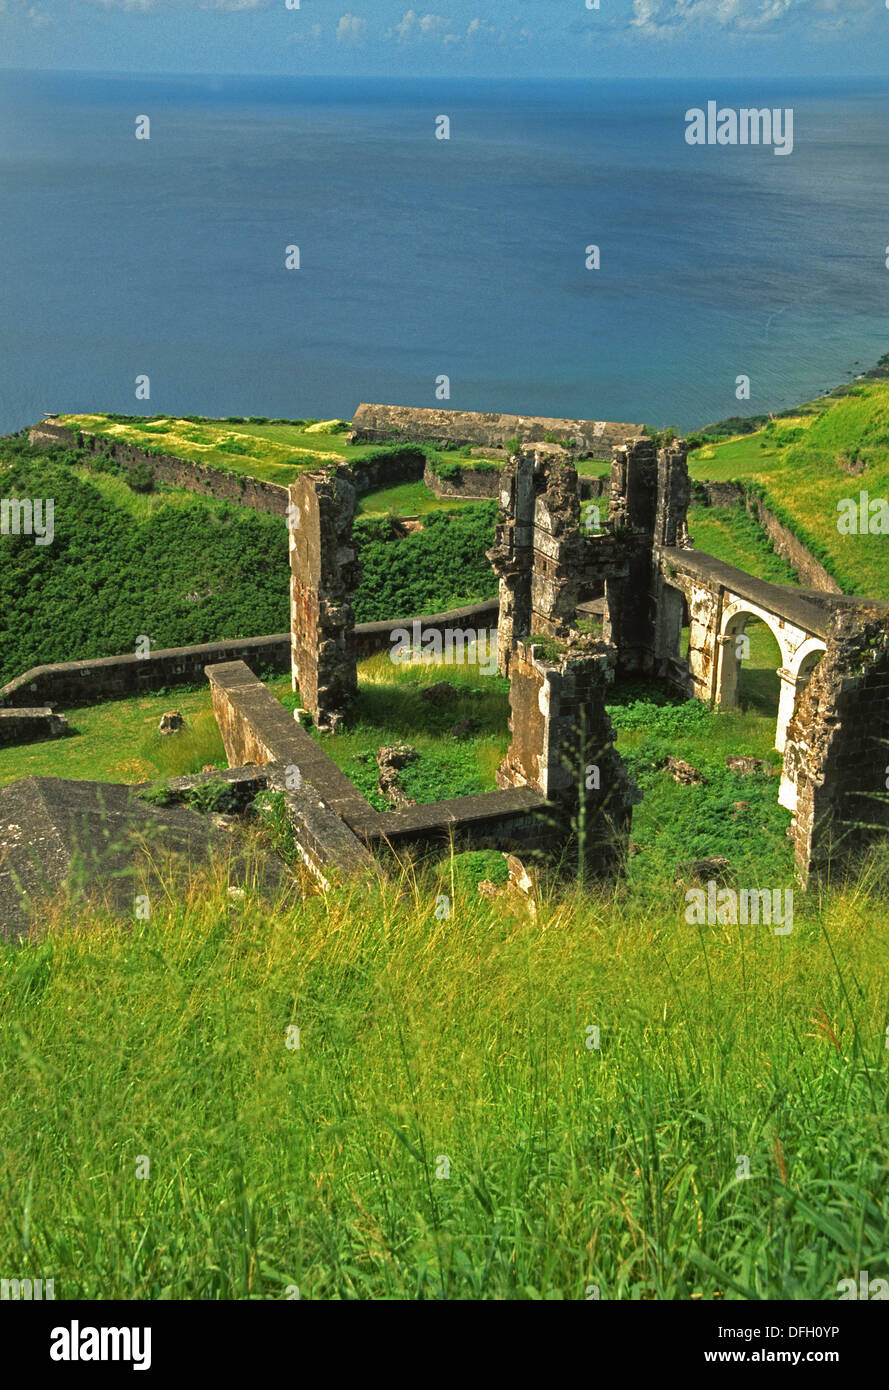 Ruins in Brimstone Hill Fortress National Park, British colonial 18th century construction on St. Kitts. Stock Photo